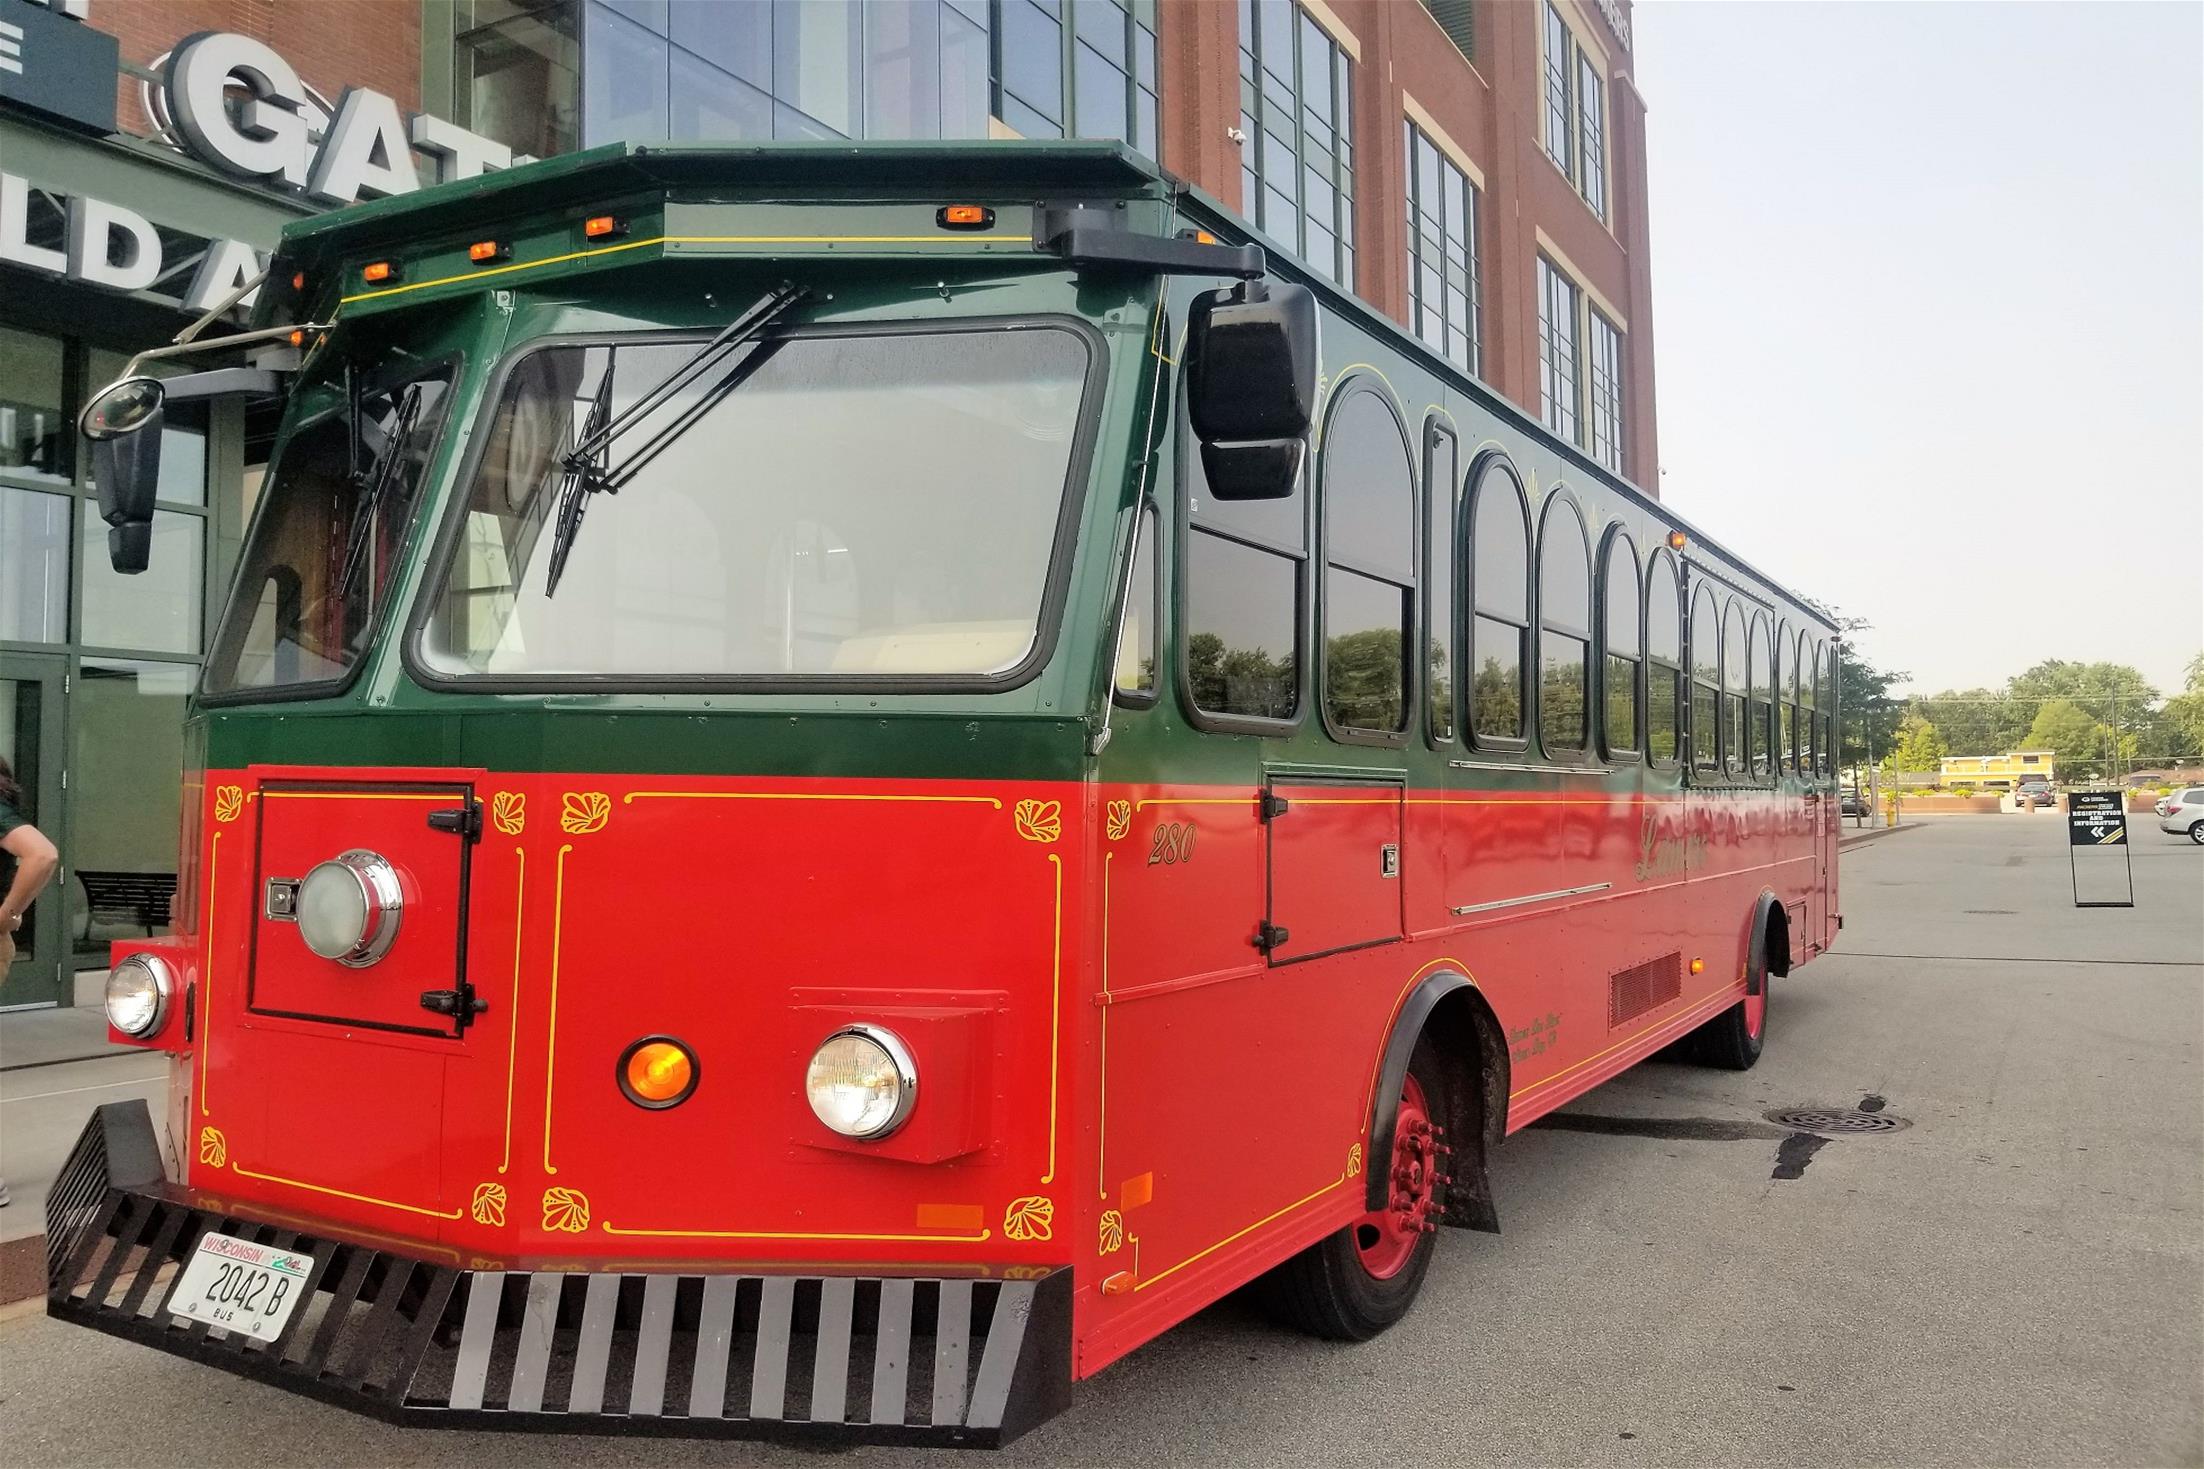 Trolley parked in front of the American Family Gate at Lambeau Field.